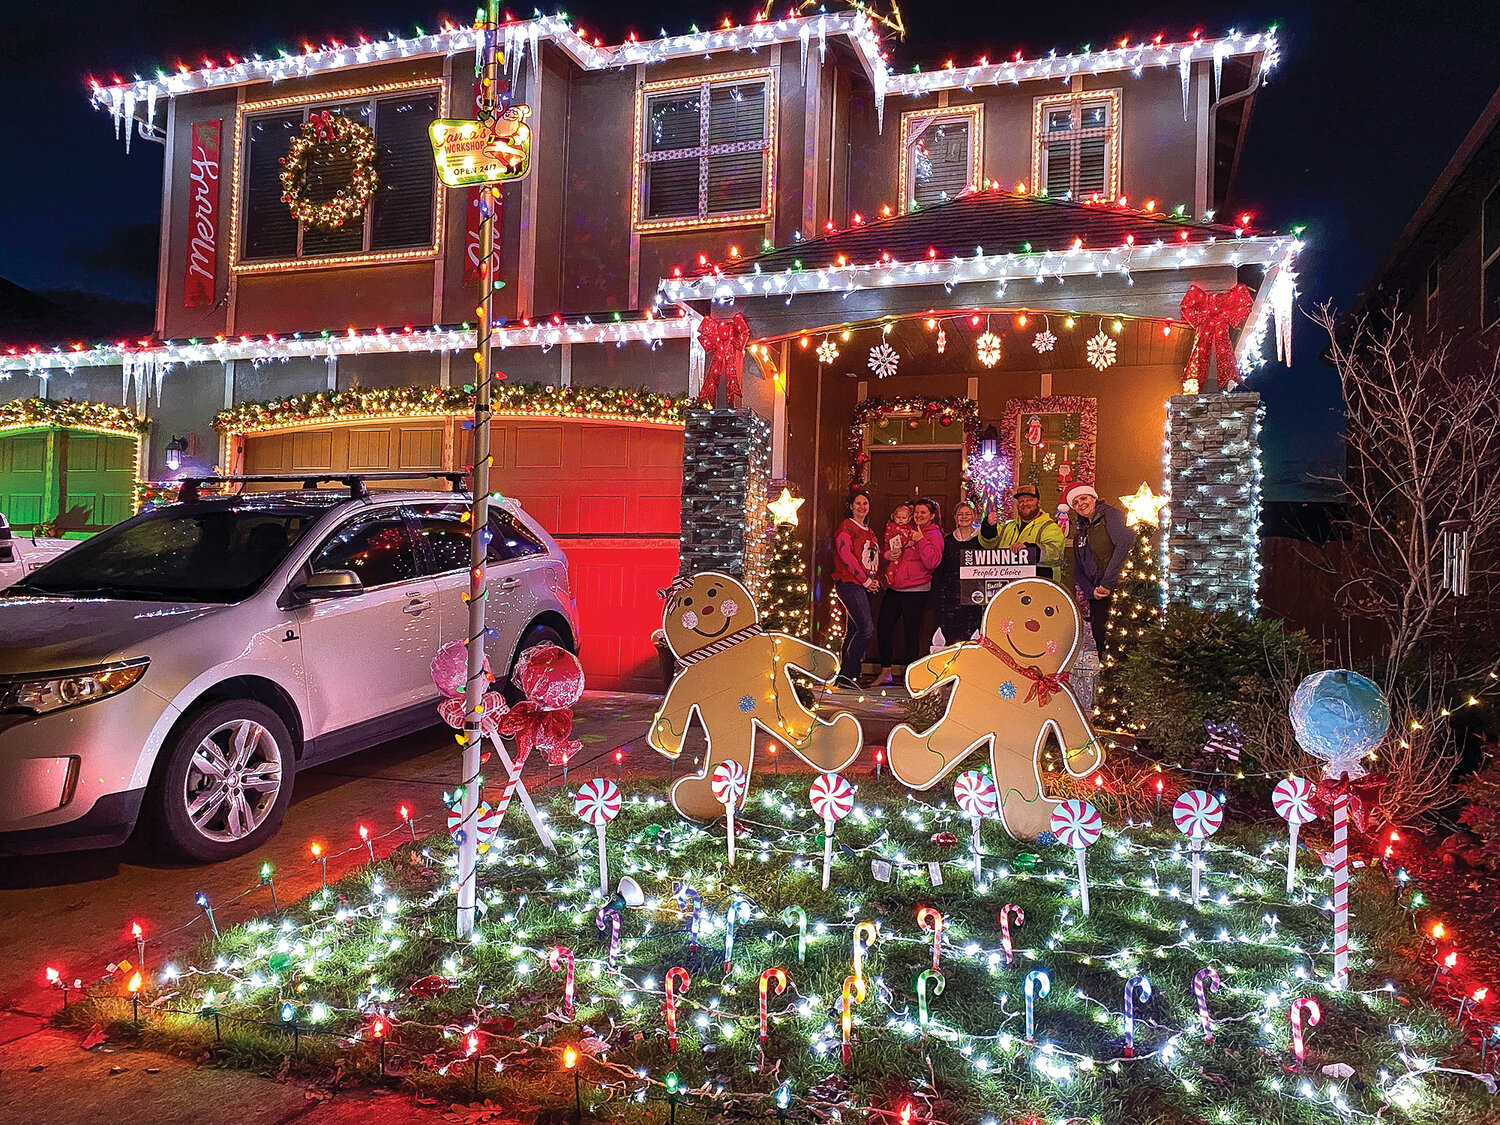 This photo shows the 2022 People’s Choice award winner in the Battle Ground Tour of Lights. See the Tour of Lights map and vote for your favorite entries beginning this week by visiting cityofbg.org/934/Battle-of-Lights---Holiday-Decorating-Co.